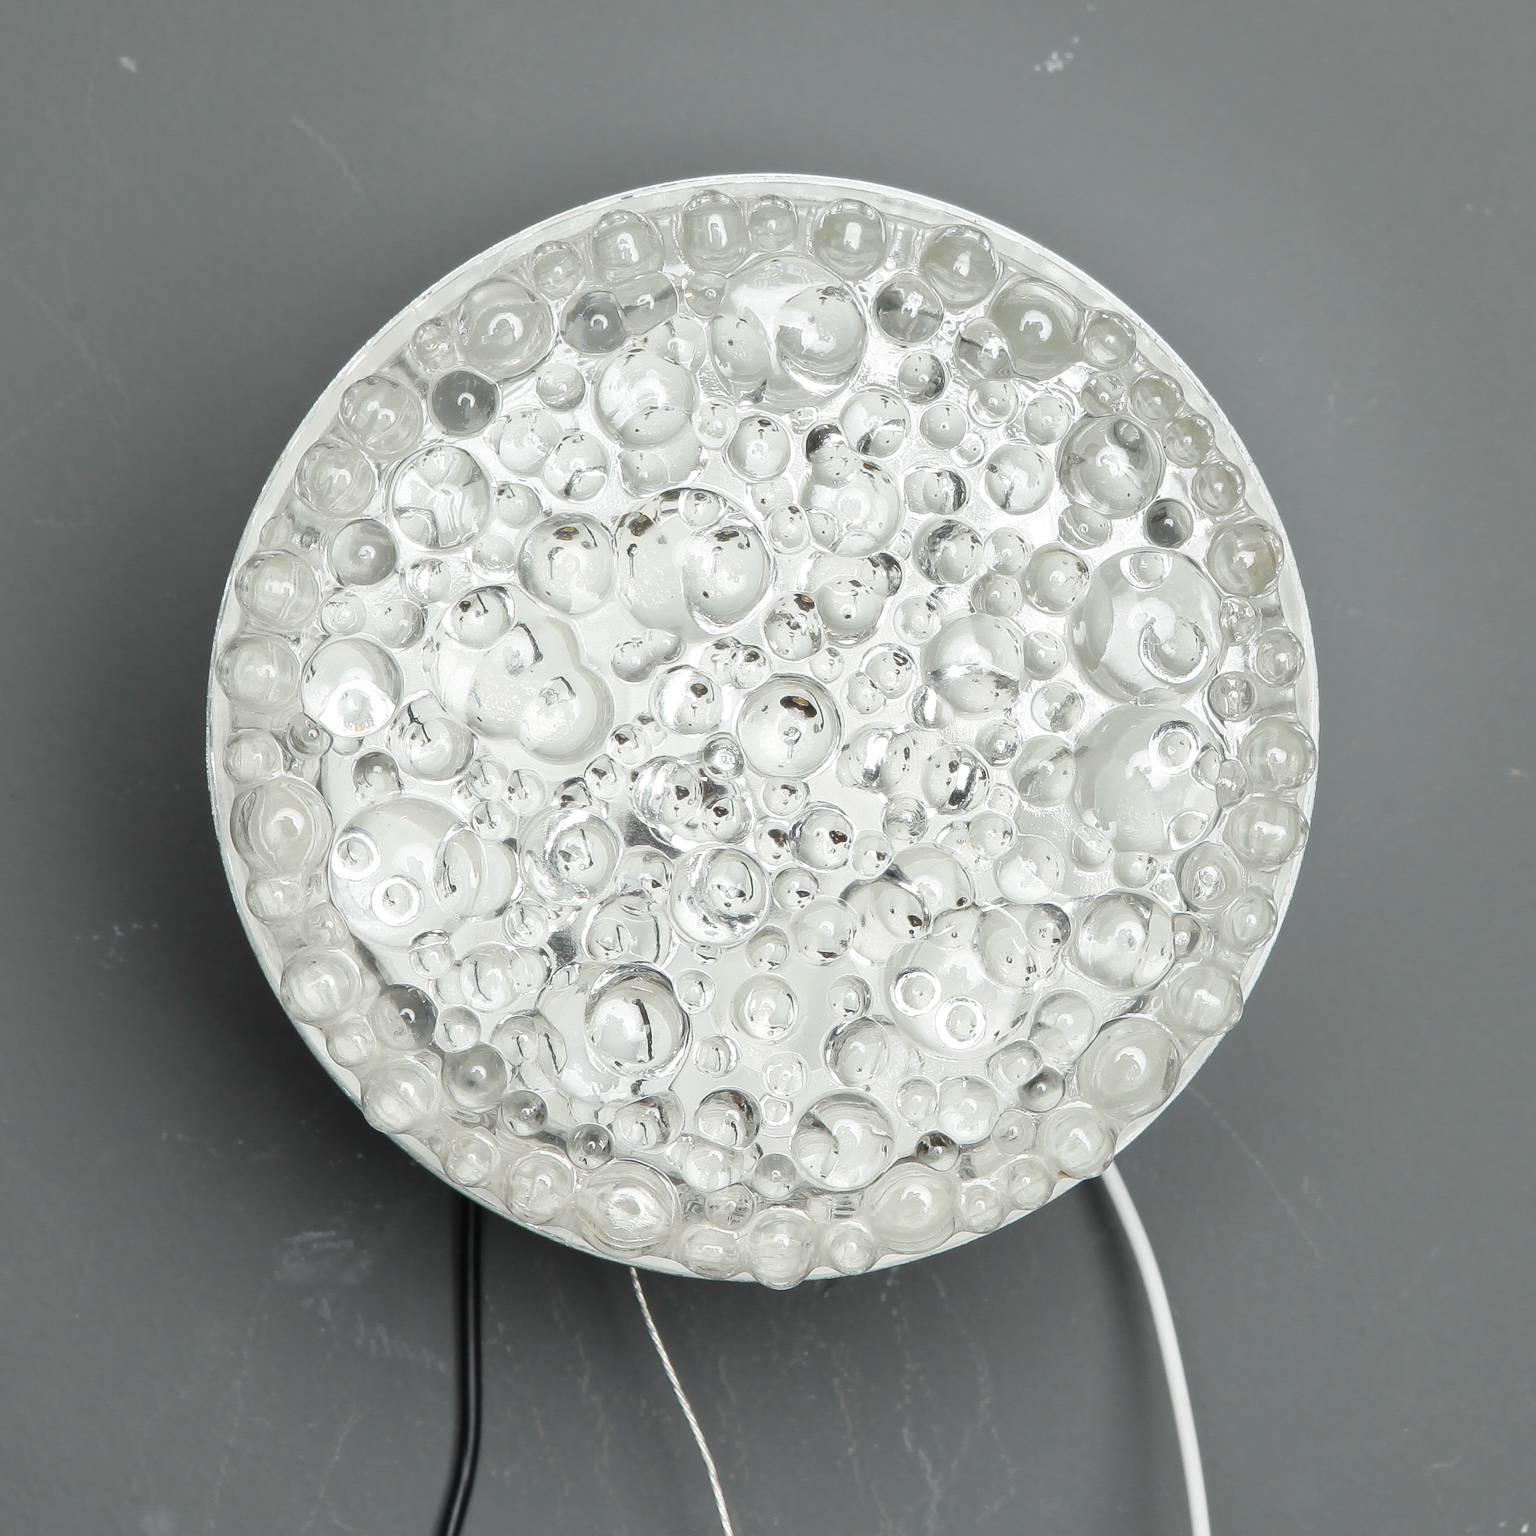 European clear glass round light fixture can be used as a sconce or flush mount fixture, circa 1970s. Molded glass has a bubble texture to the surface. New wiring for US electrical standards. Currently eight lights available. Sold and priced